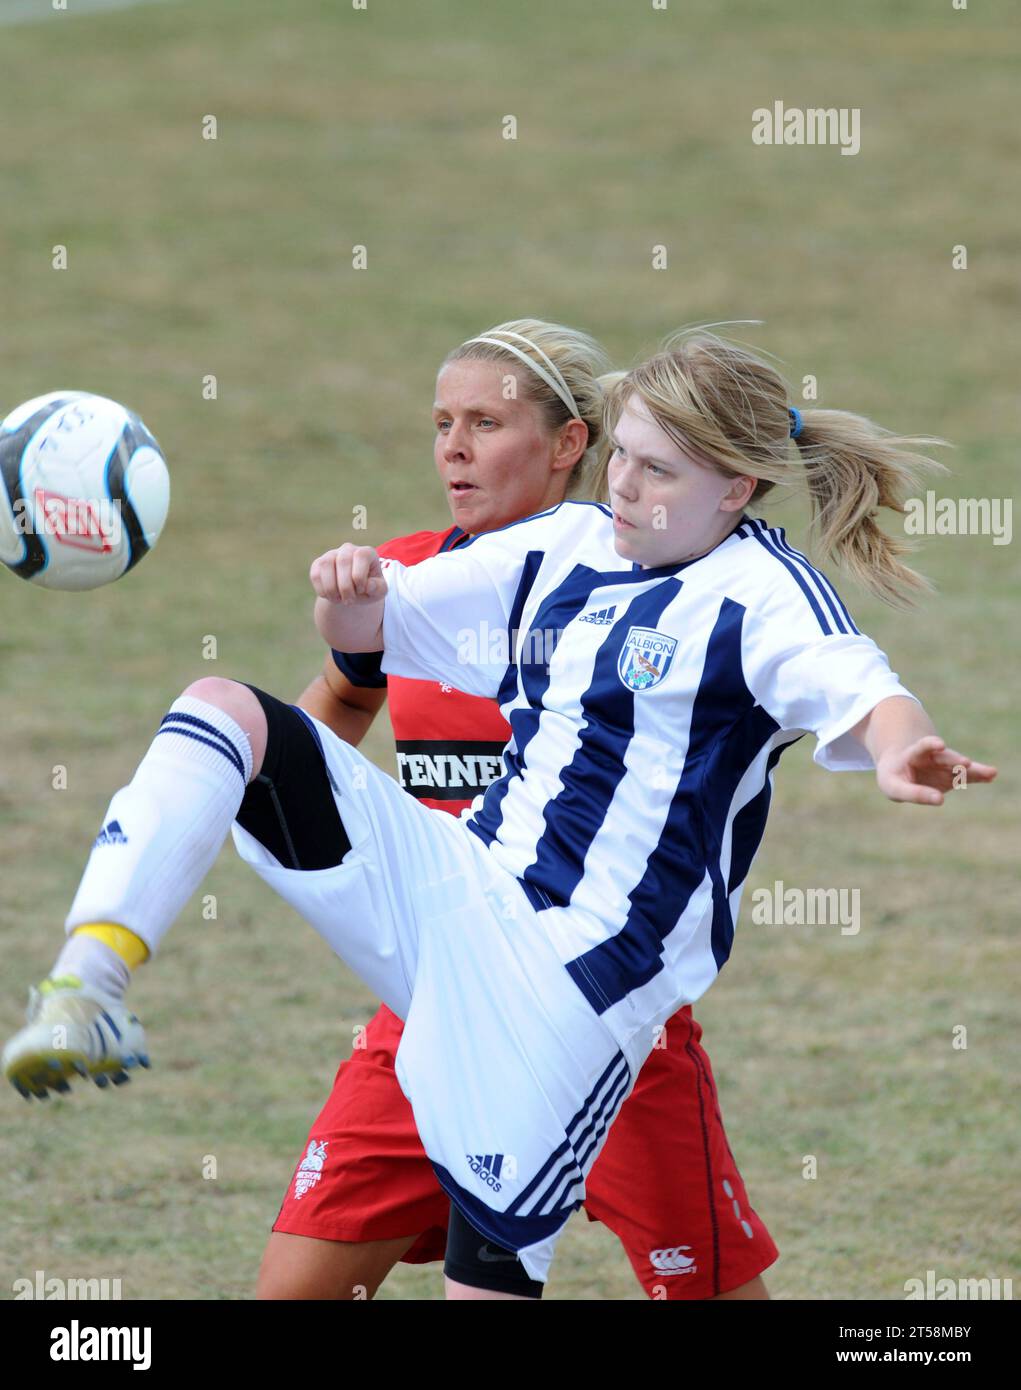 Robyn James of West Bromwich Albion and Vikki Eastwood of Preston North End ladies team. West Bromwich Albion Ladies v Preston North End 21/08/2011 Stock Photo